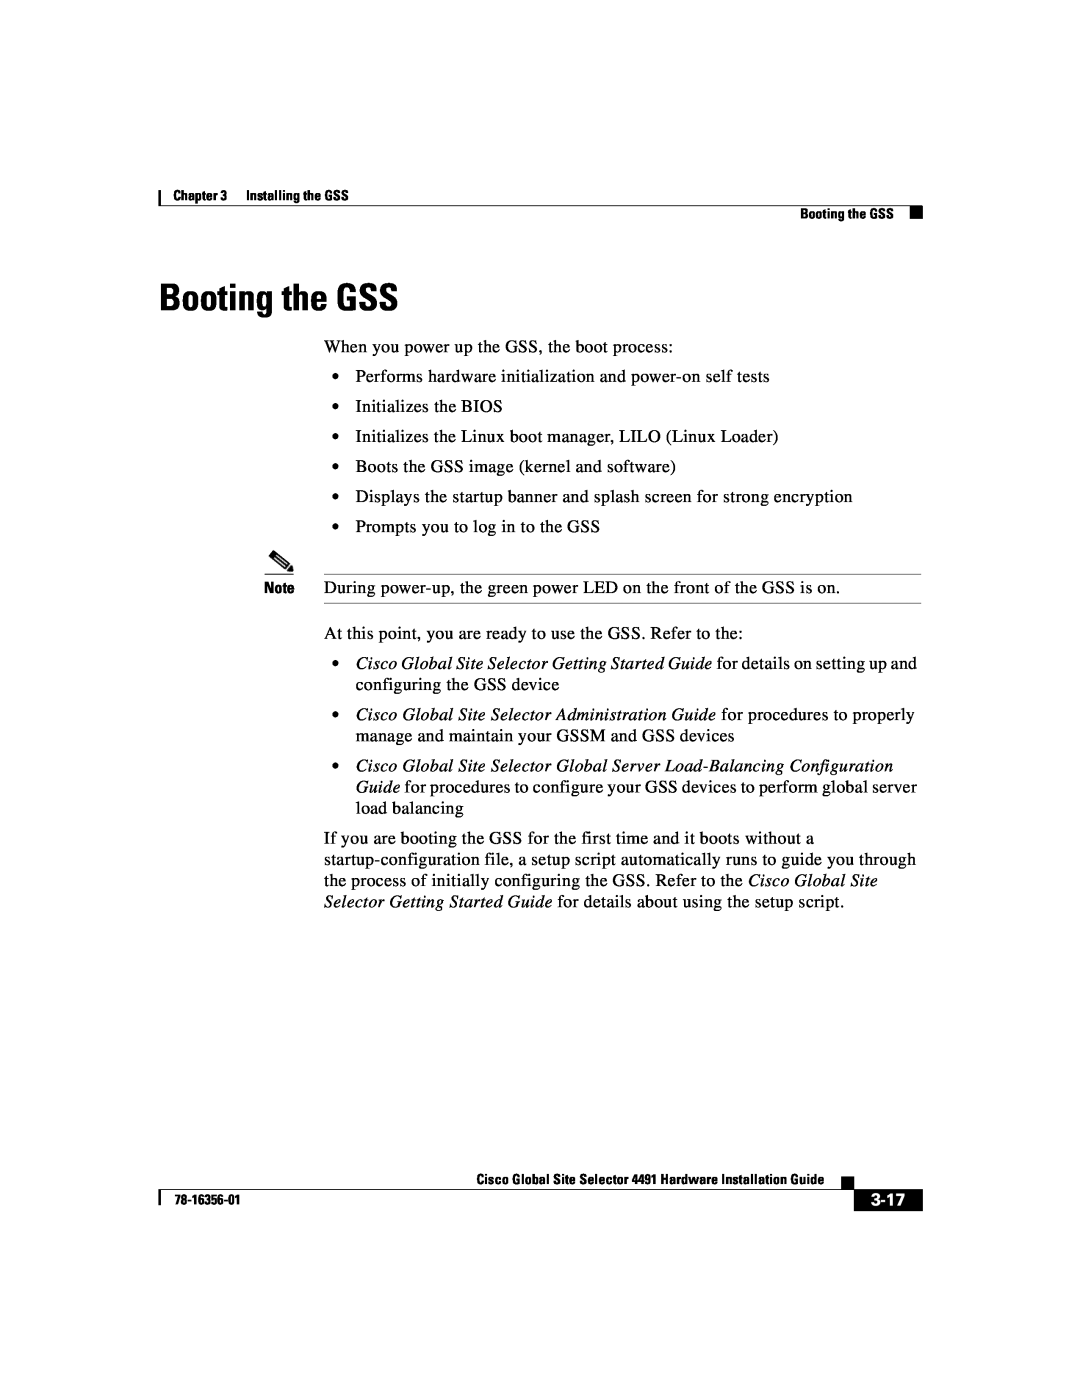 Cisco Systems 78-16356-01 manual Booting the GSS, 3-17 